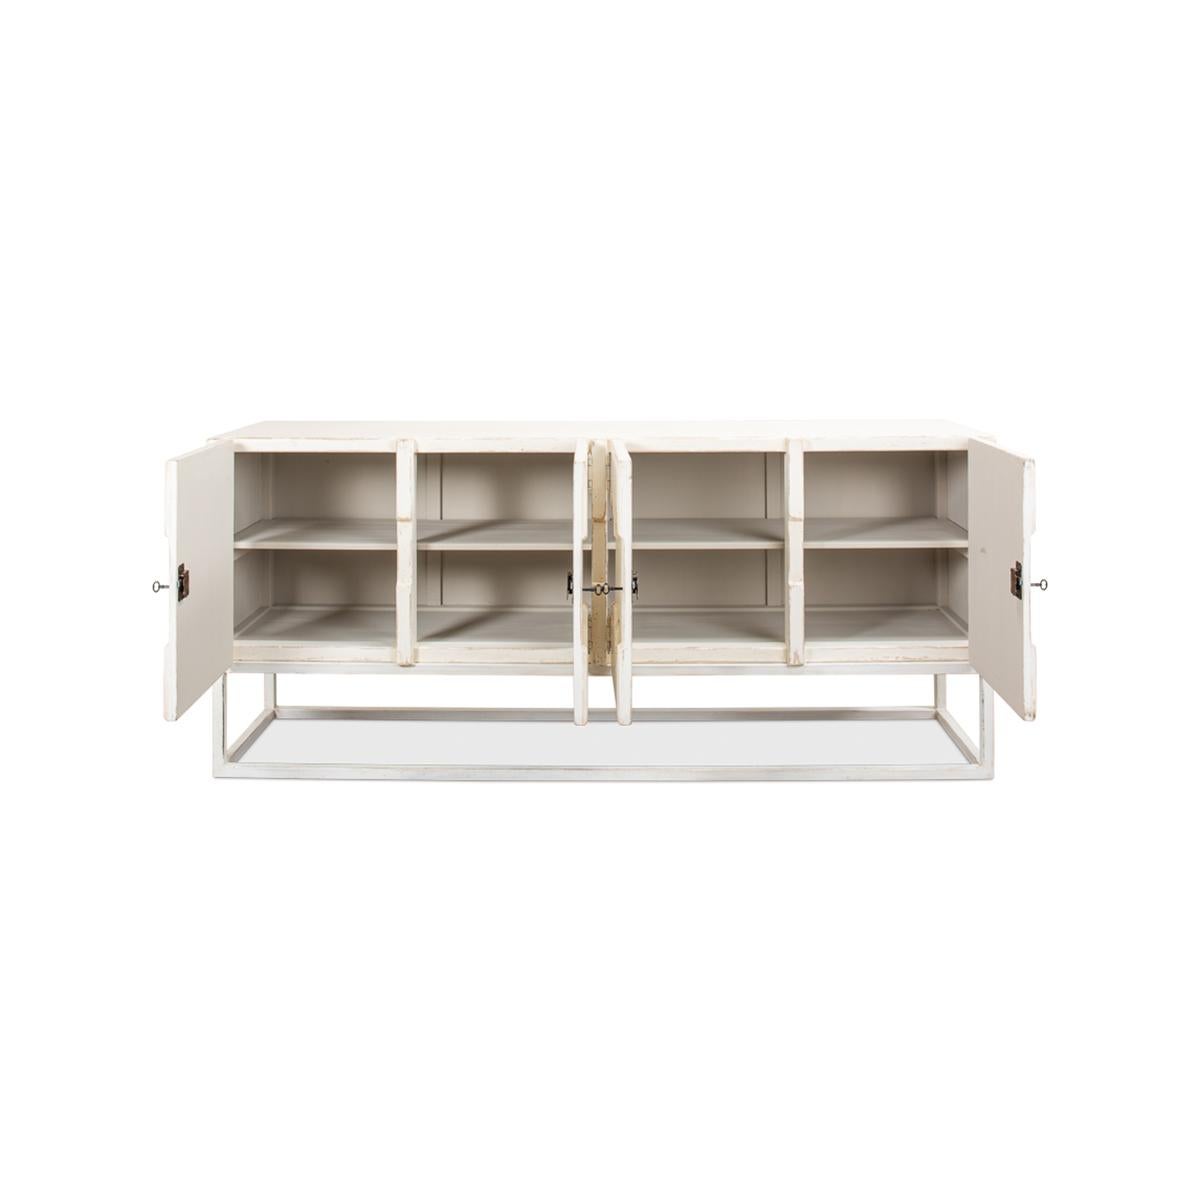 Made with reclaimed pine in an antiqued and distressed whitewash finish. With applied molding inspired by Aztec design. The painted interior with removable shelves and raised on a modern open cube form base.

Dimensions: 80